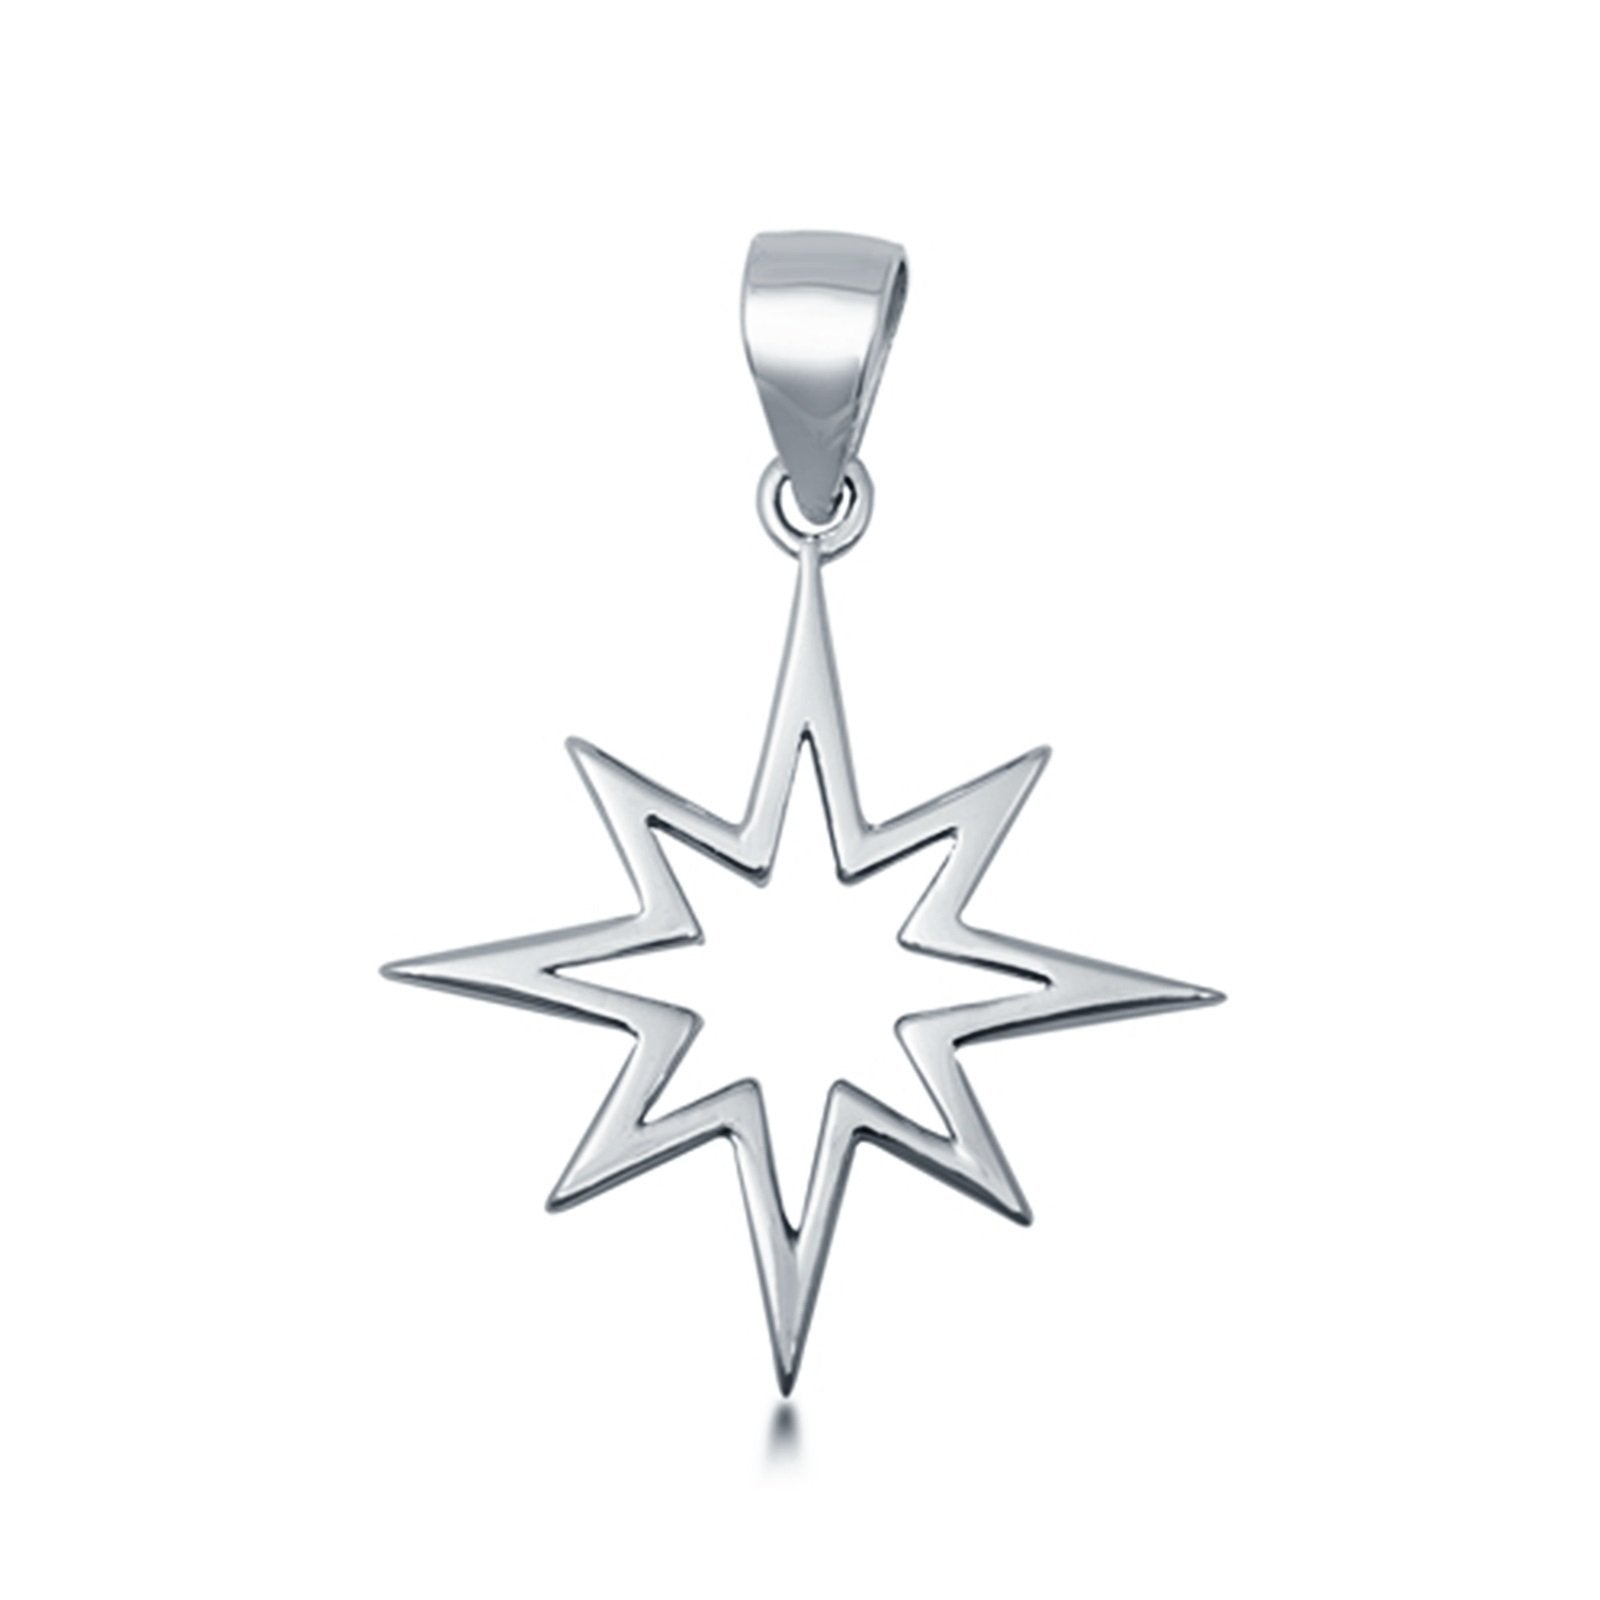 Fashion Jewelry Star Charm Pendant 925 Sterling Silver